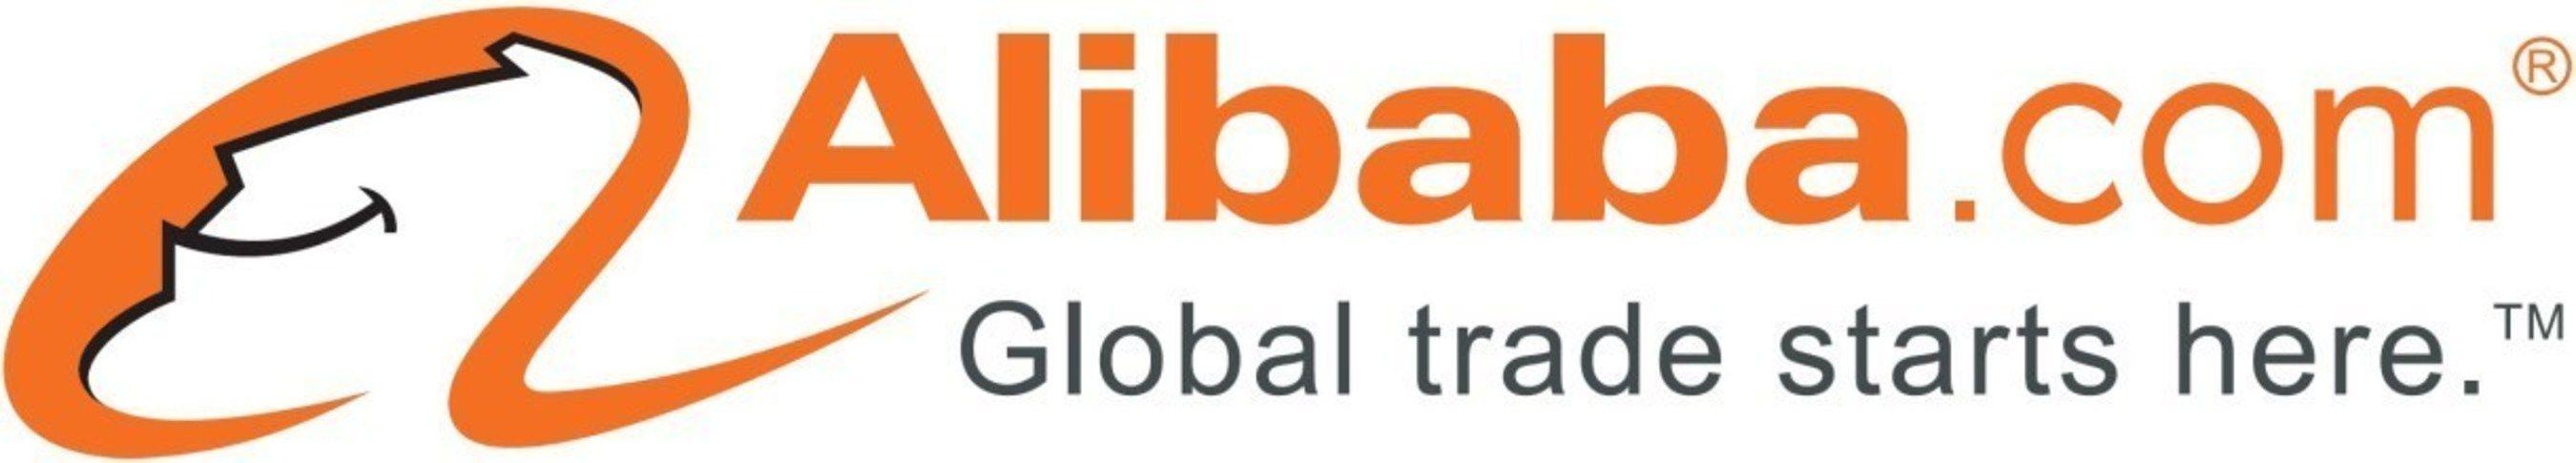 Alibaba.com Logo - Alibaba B2B and UBM Join Forces to Create New B2B Trading Experience